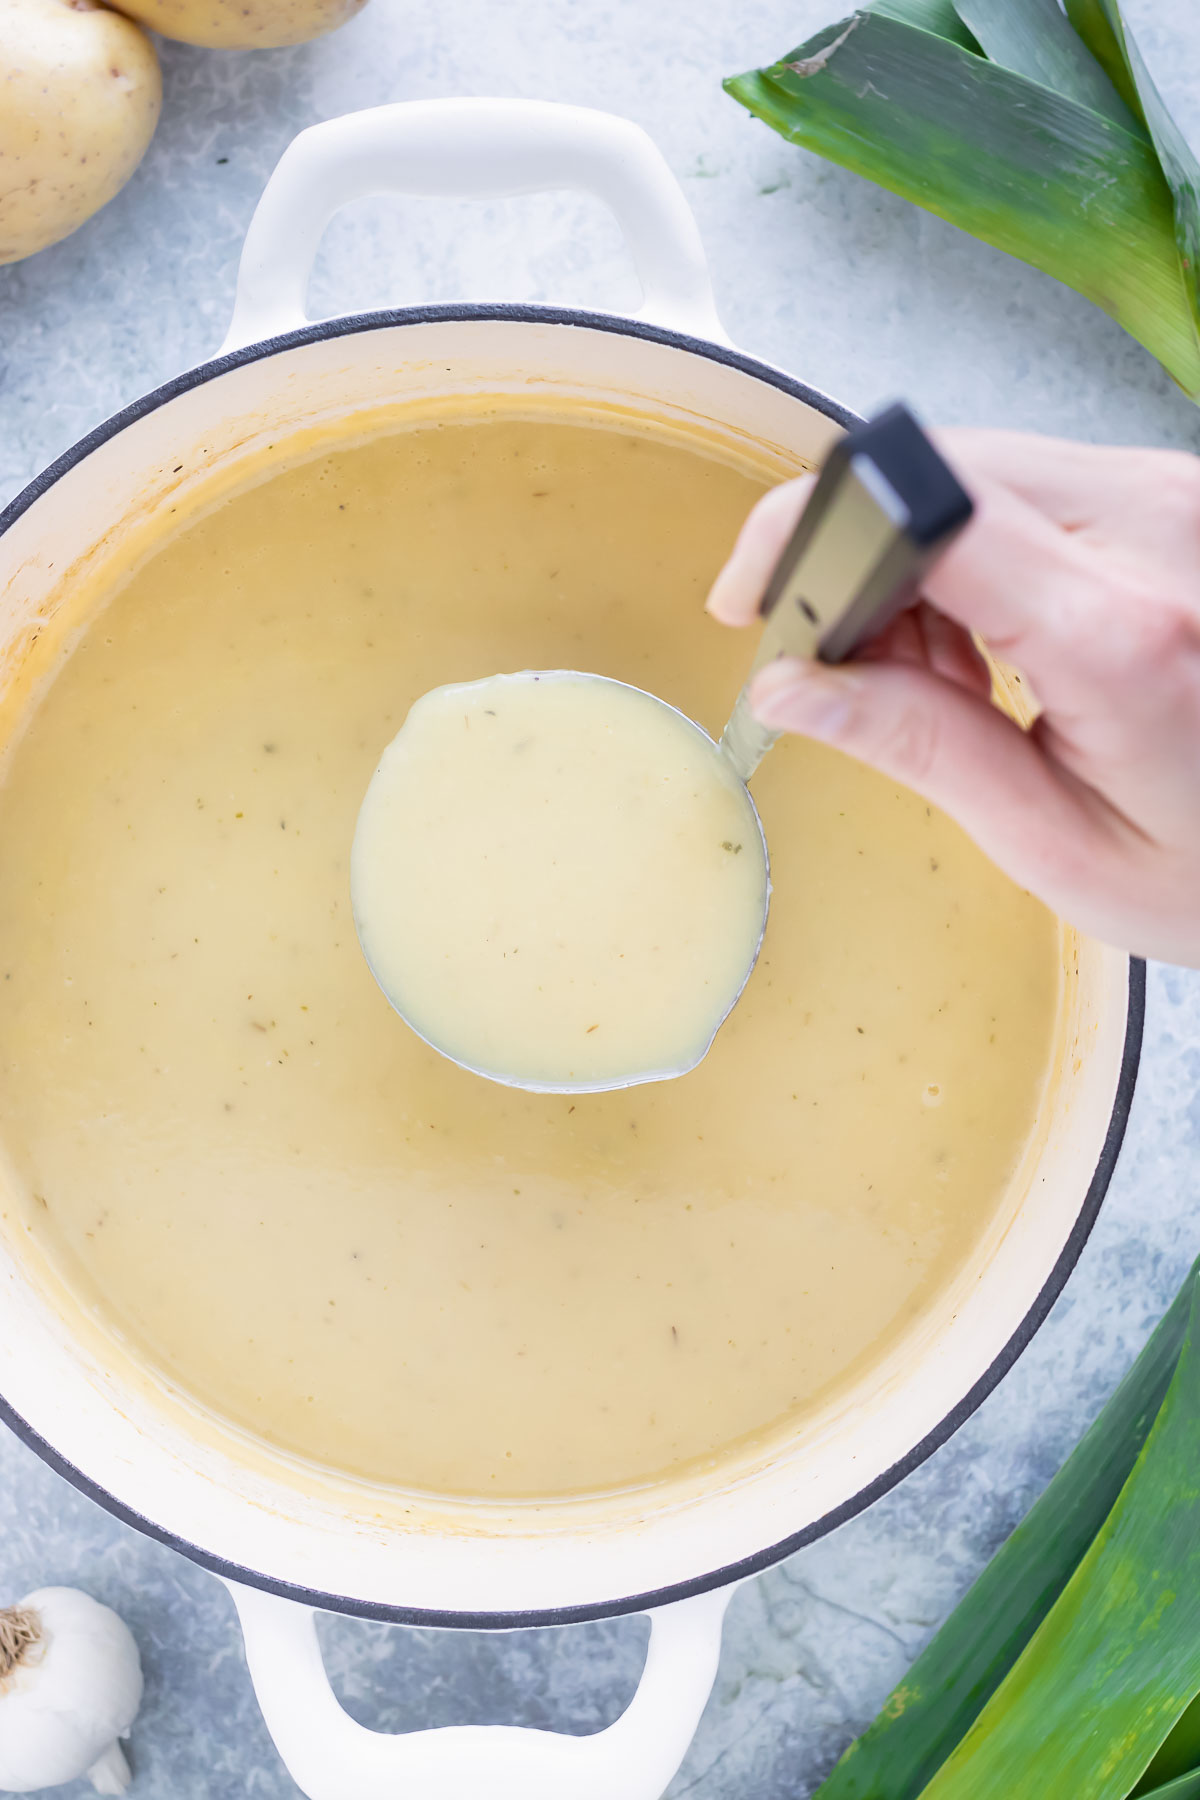 A soup ladle scooping out a serving of a healthy and creamy vegan potato leek soup from a Dutch oven.